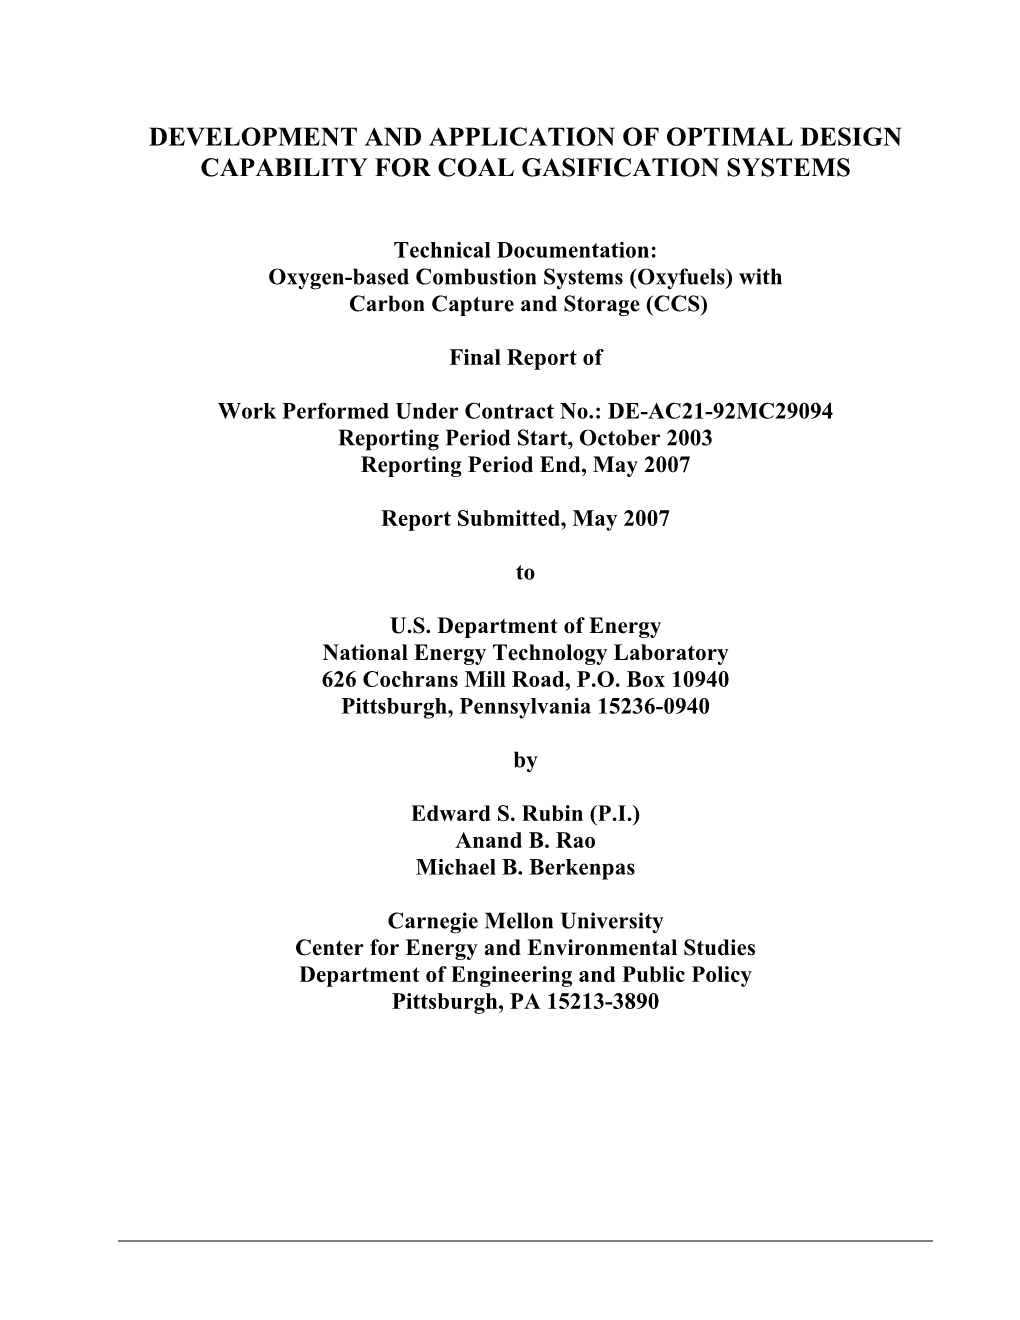 Development and Application of Optimal Design Capability for Coal Gasification Systems